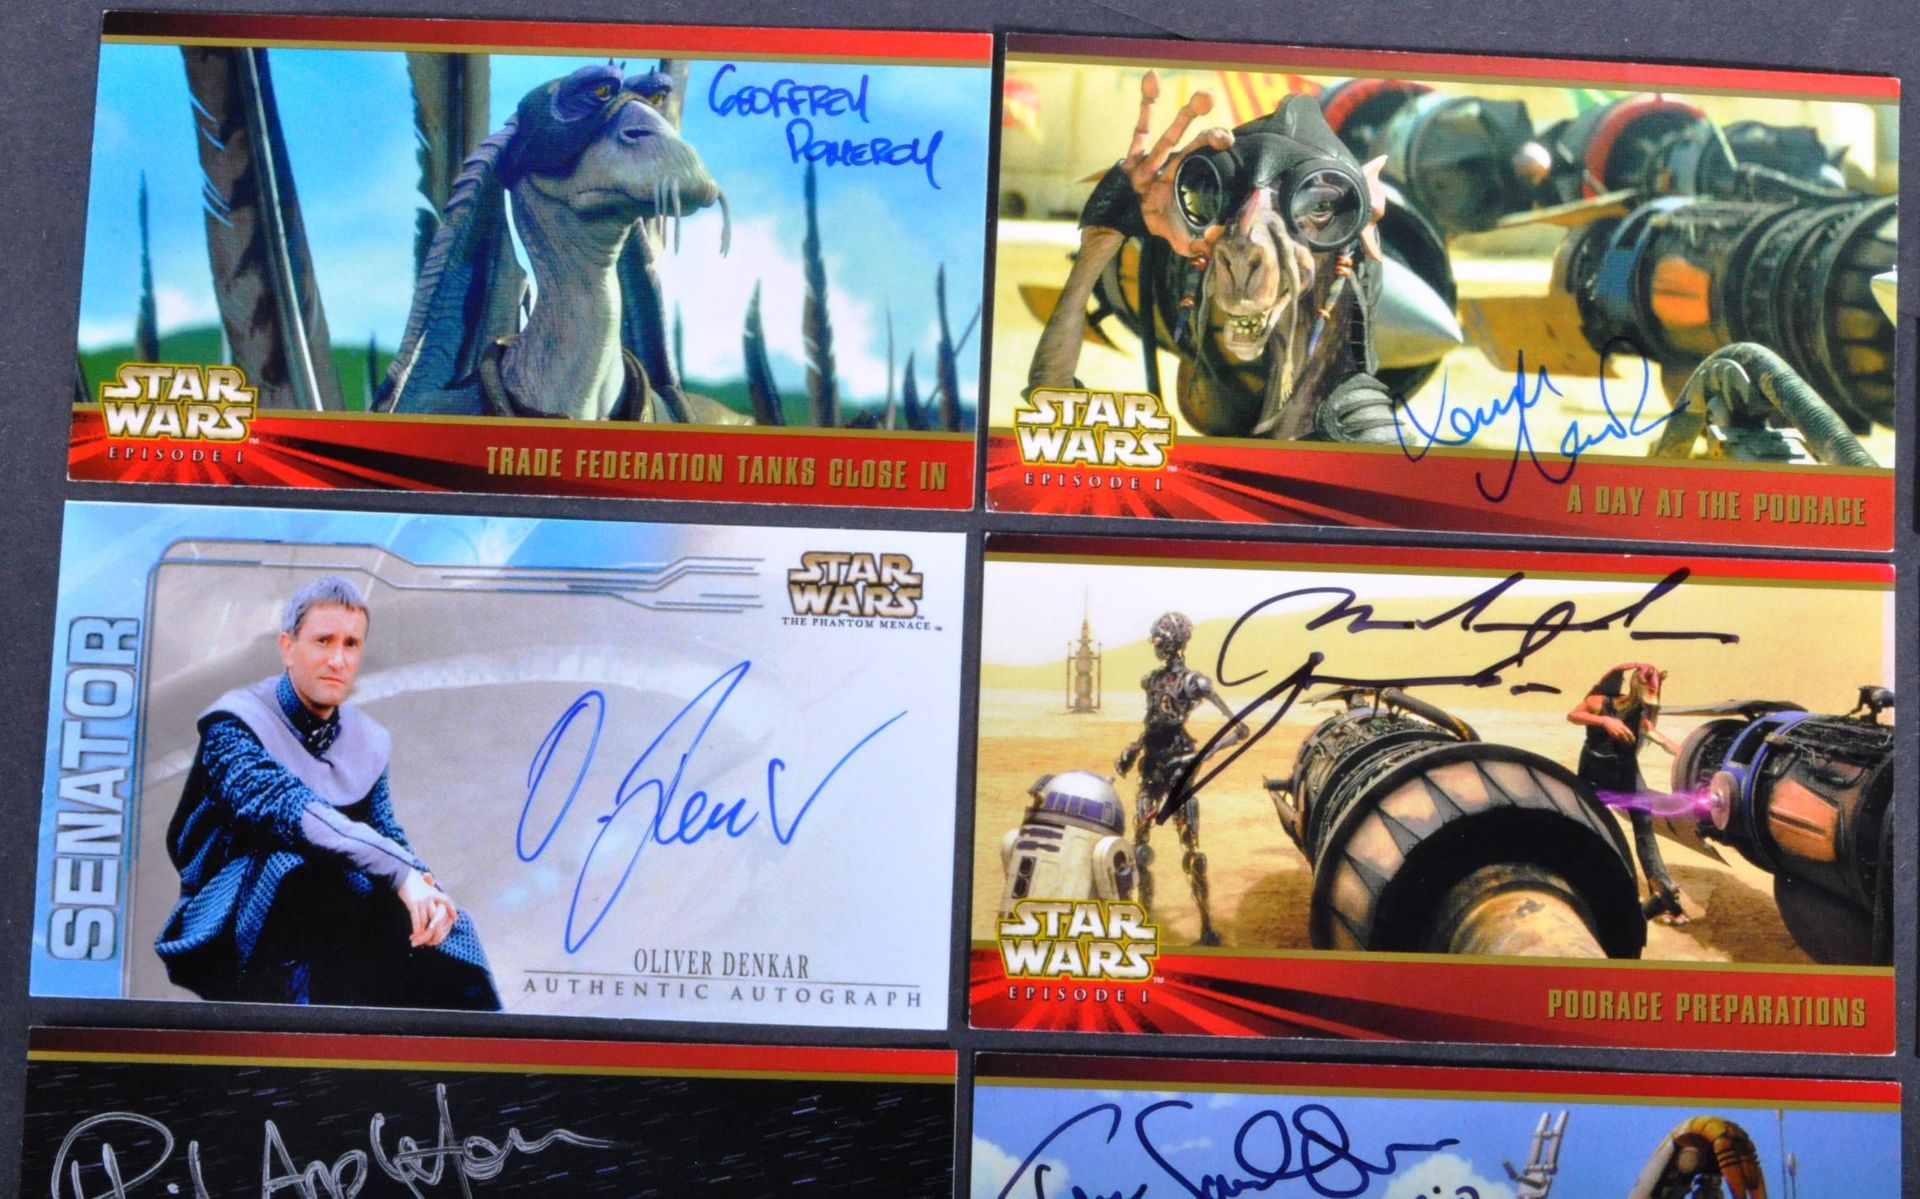 STAR WARS - EPISODE I - TOPPS WIDEVISION AUTOGRAPHED TRADING CARDS - Bild 2 aus 4